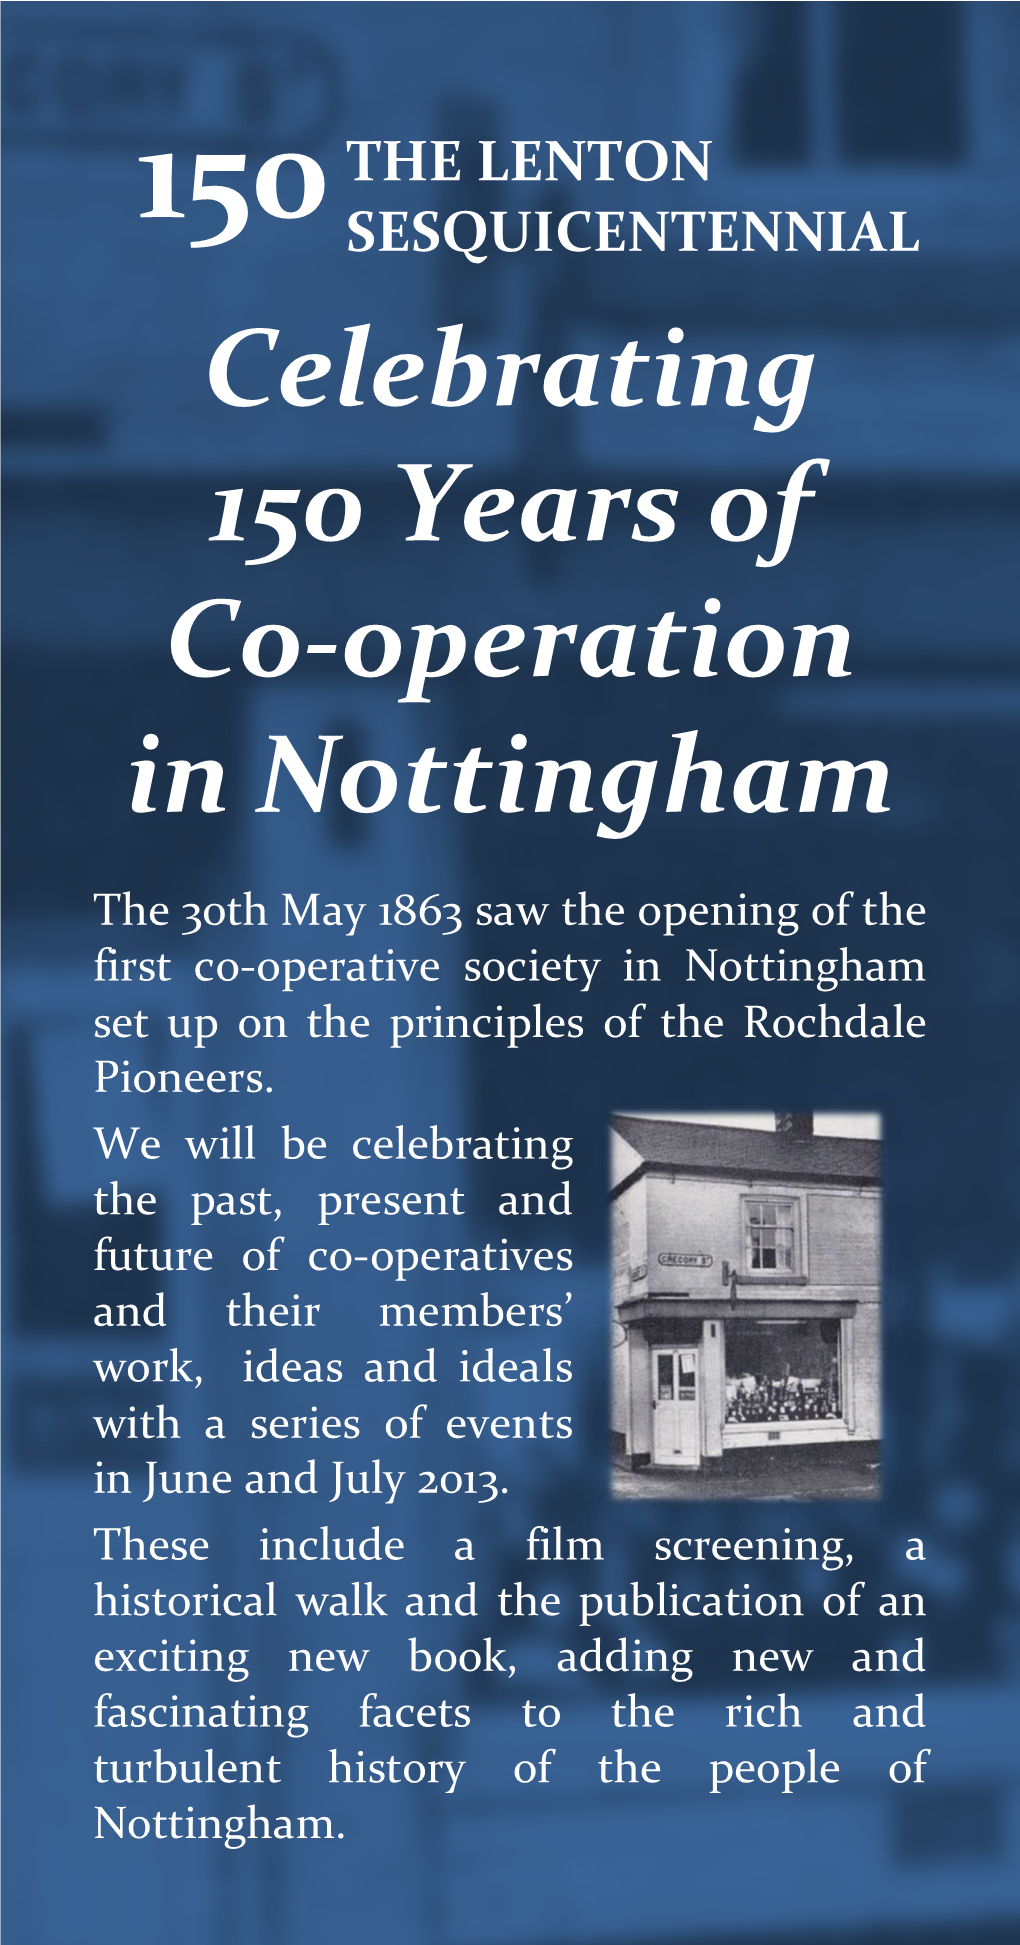 Celebrating 150 Years of Co-Operation in Nottingham